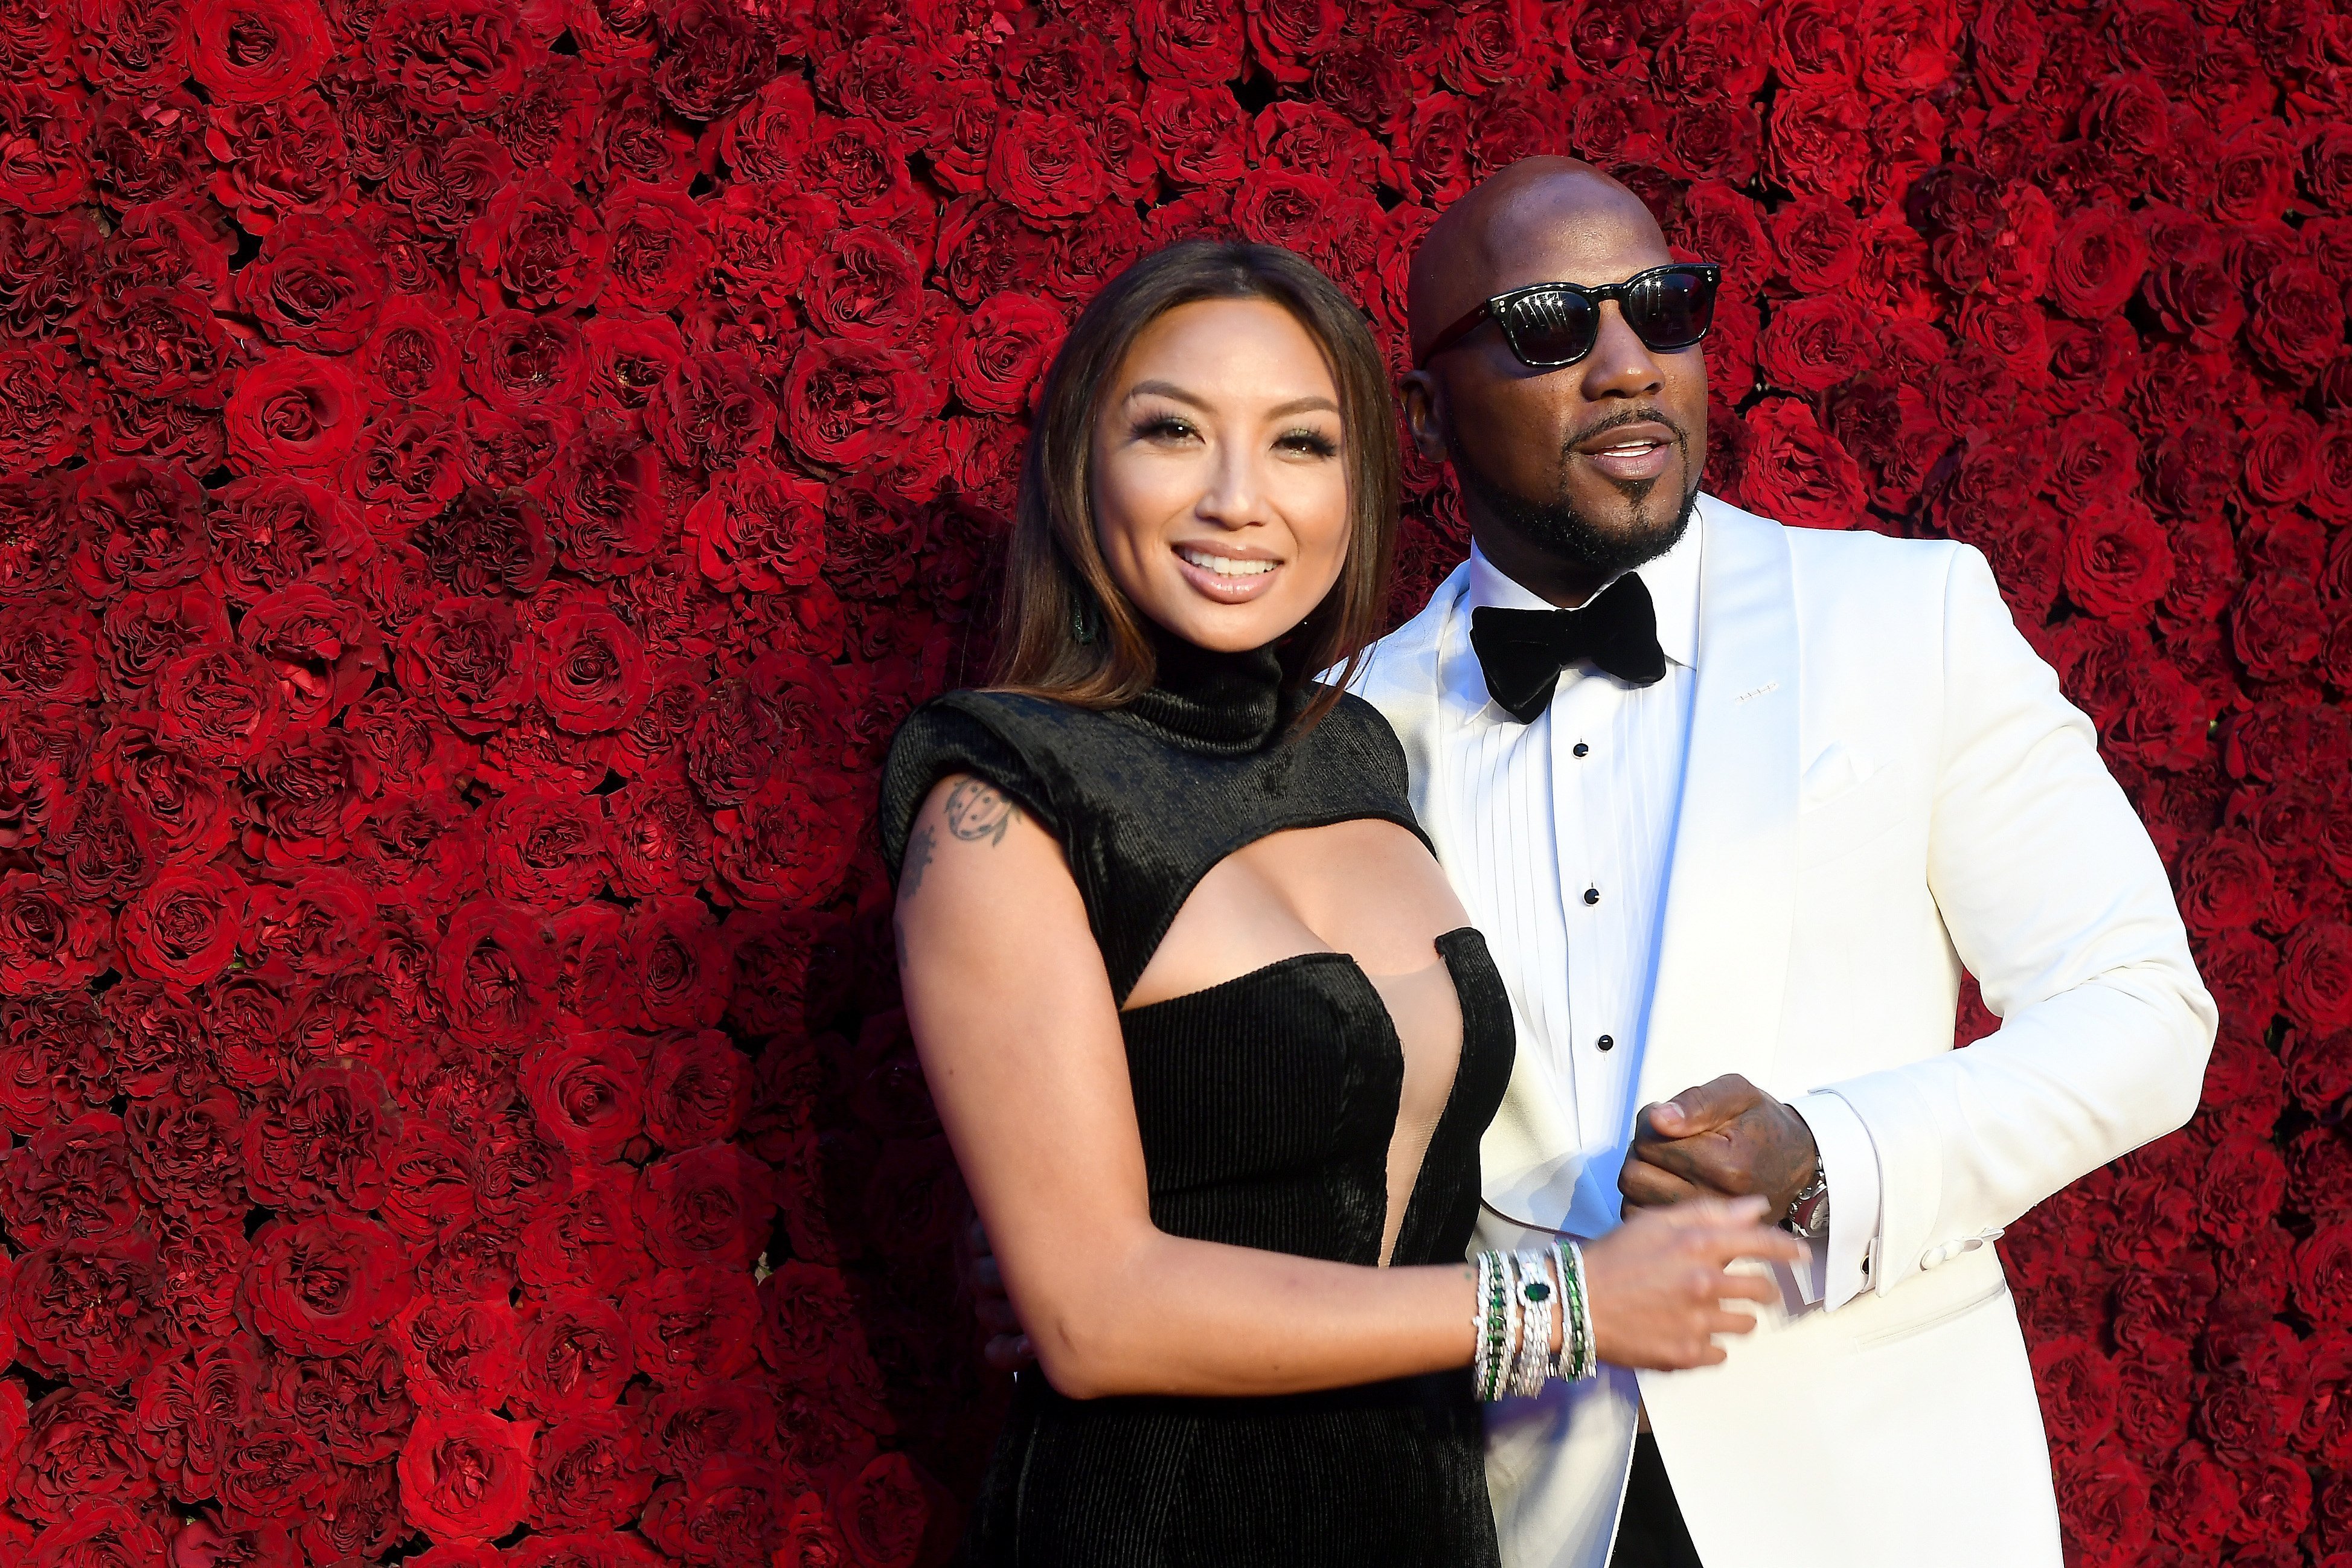 Jeannie Mai and Jeezy attend the Grand Opening Gala of Tyler Perry Studios in Georgia | Source: Getty Images/GlobalImagesUkraine